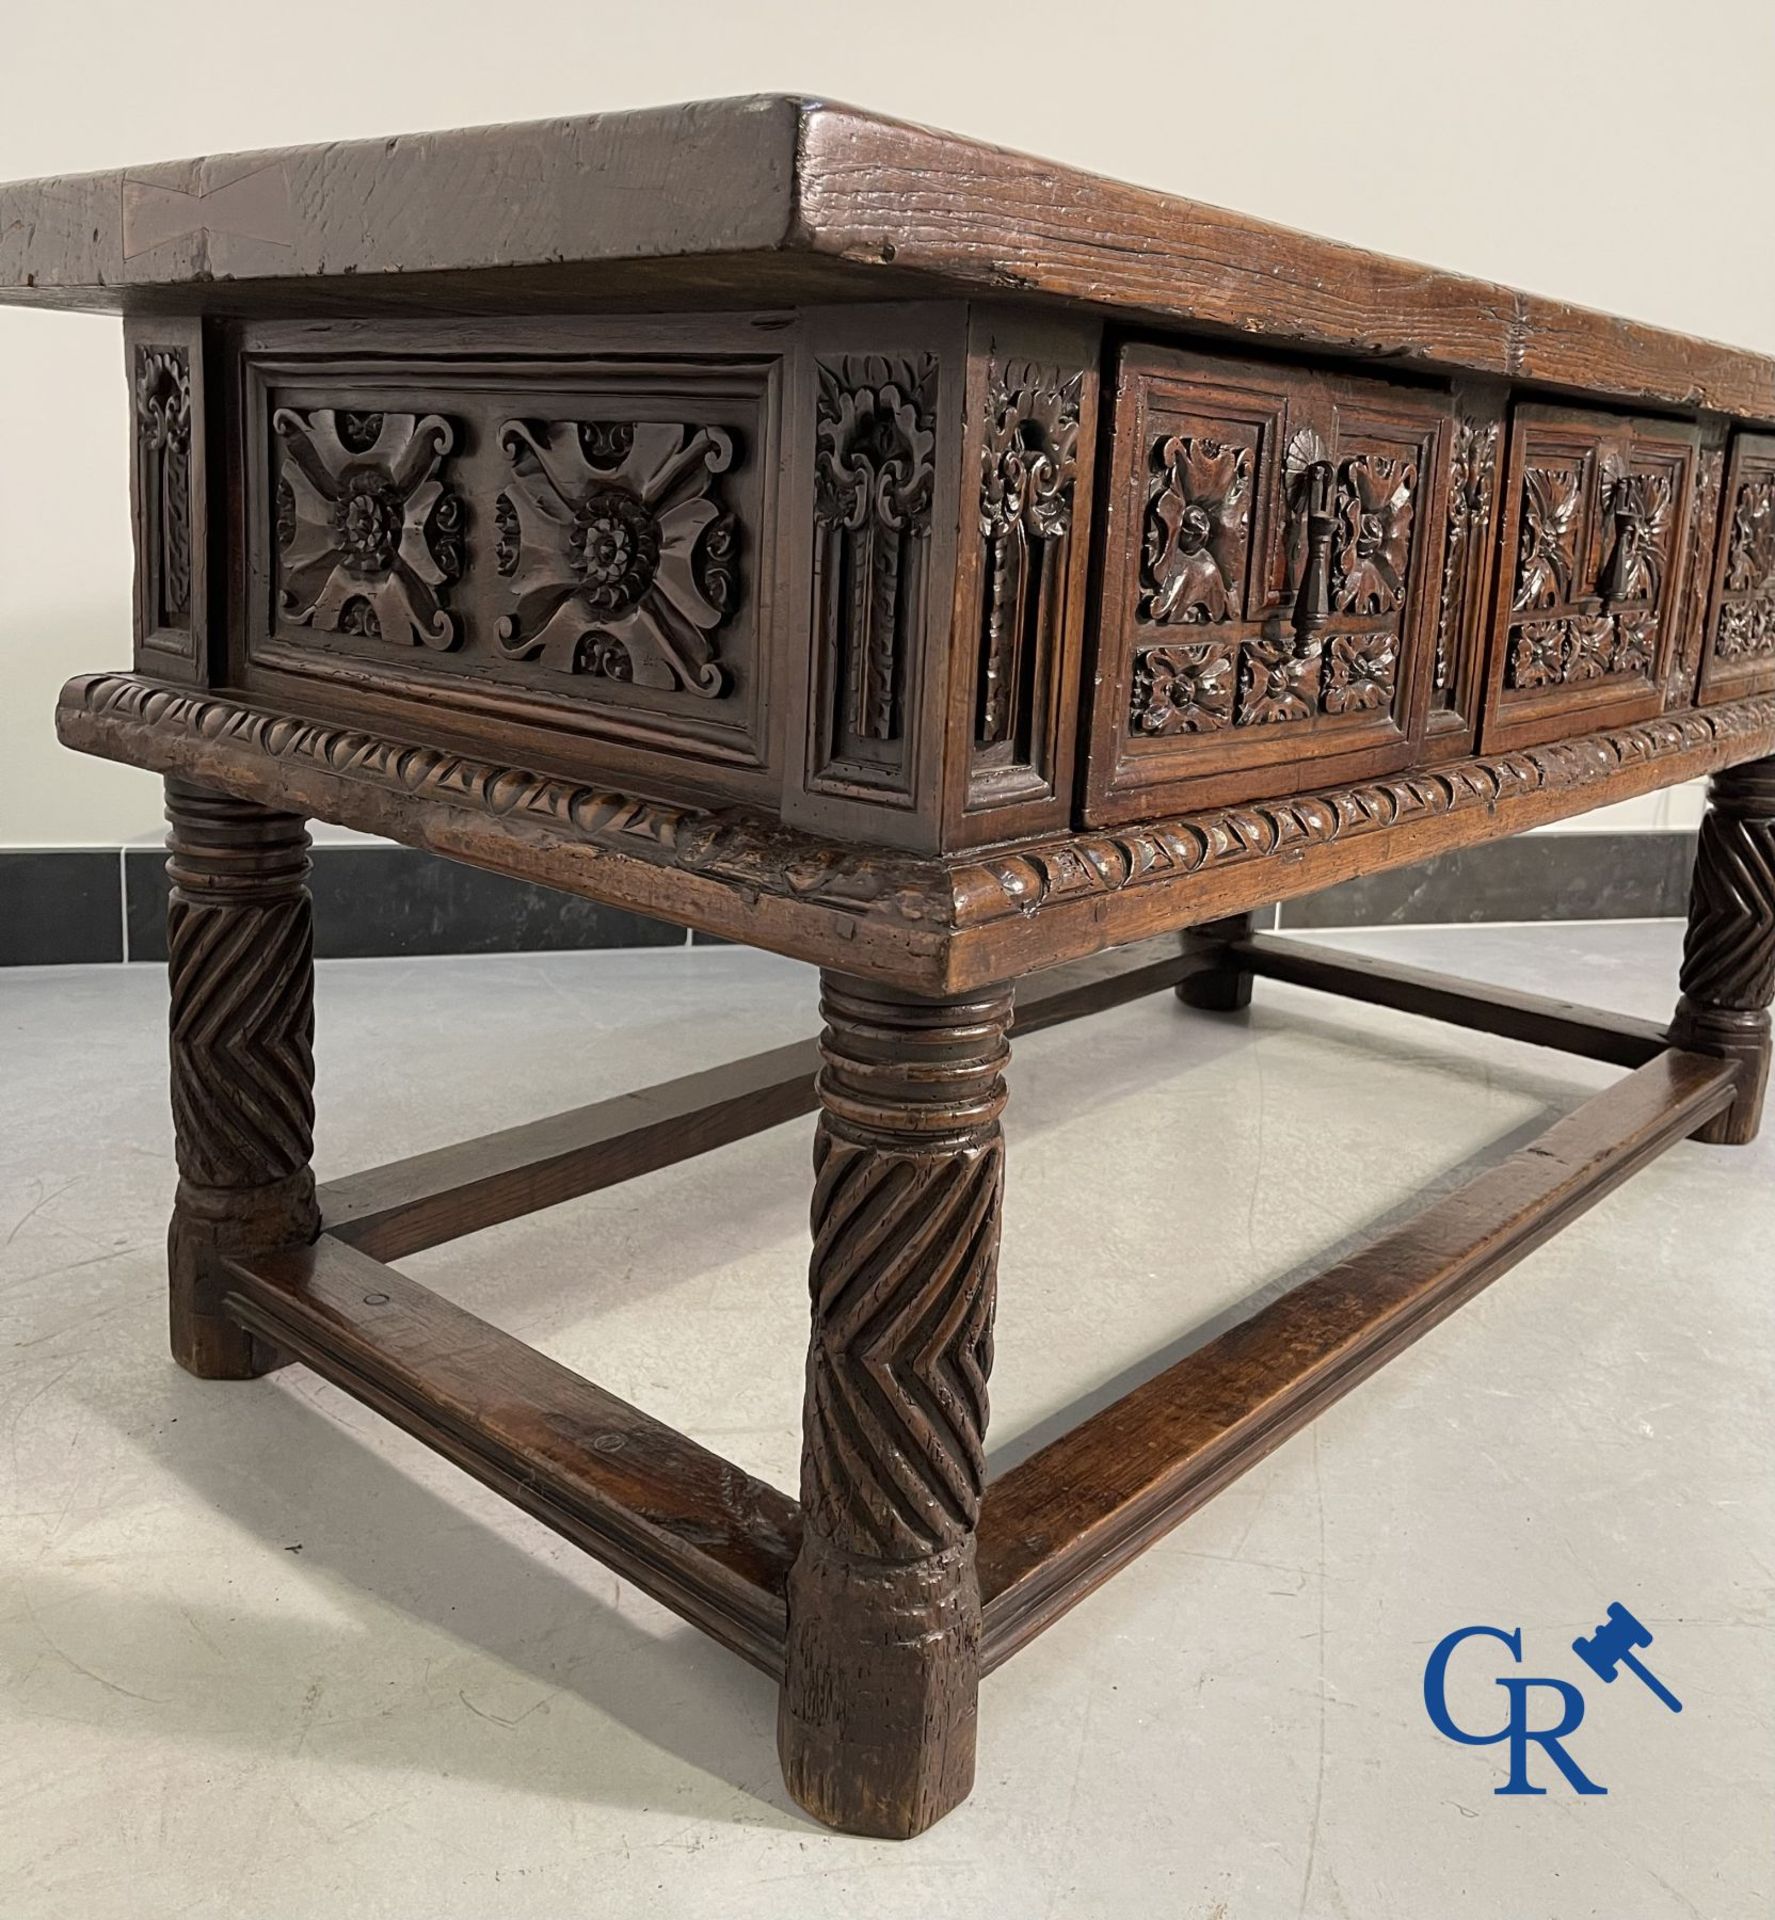 Furniture: 17th century carved walnut table with 3 drawers. - Image 2 of 22